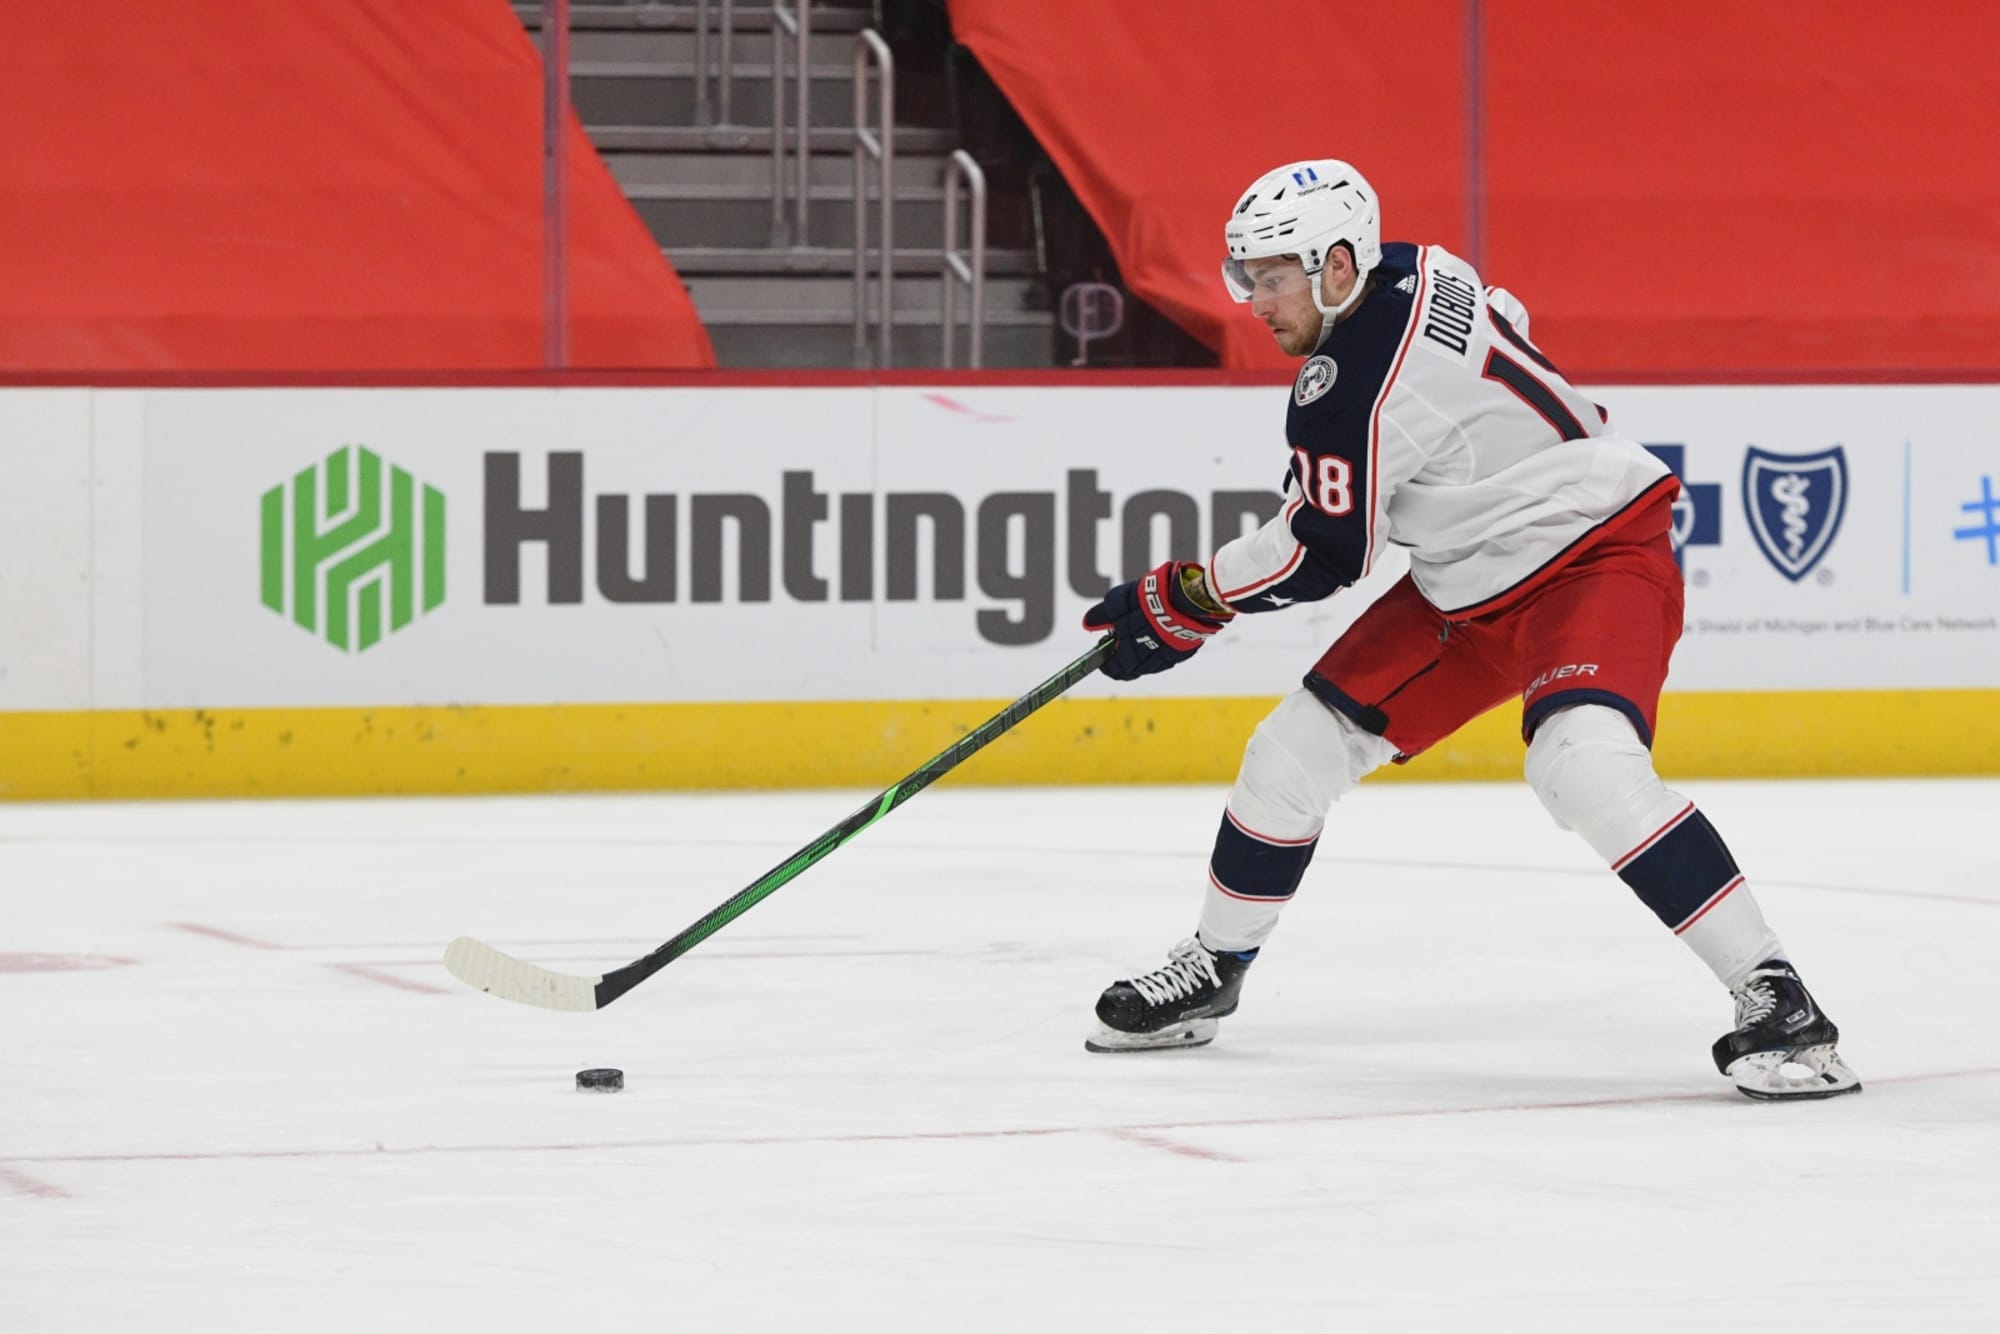 Pierre-Luc Dubois shares hilarious John Tortorella story from time